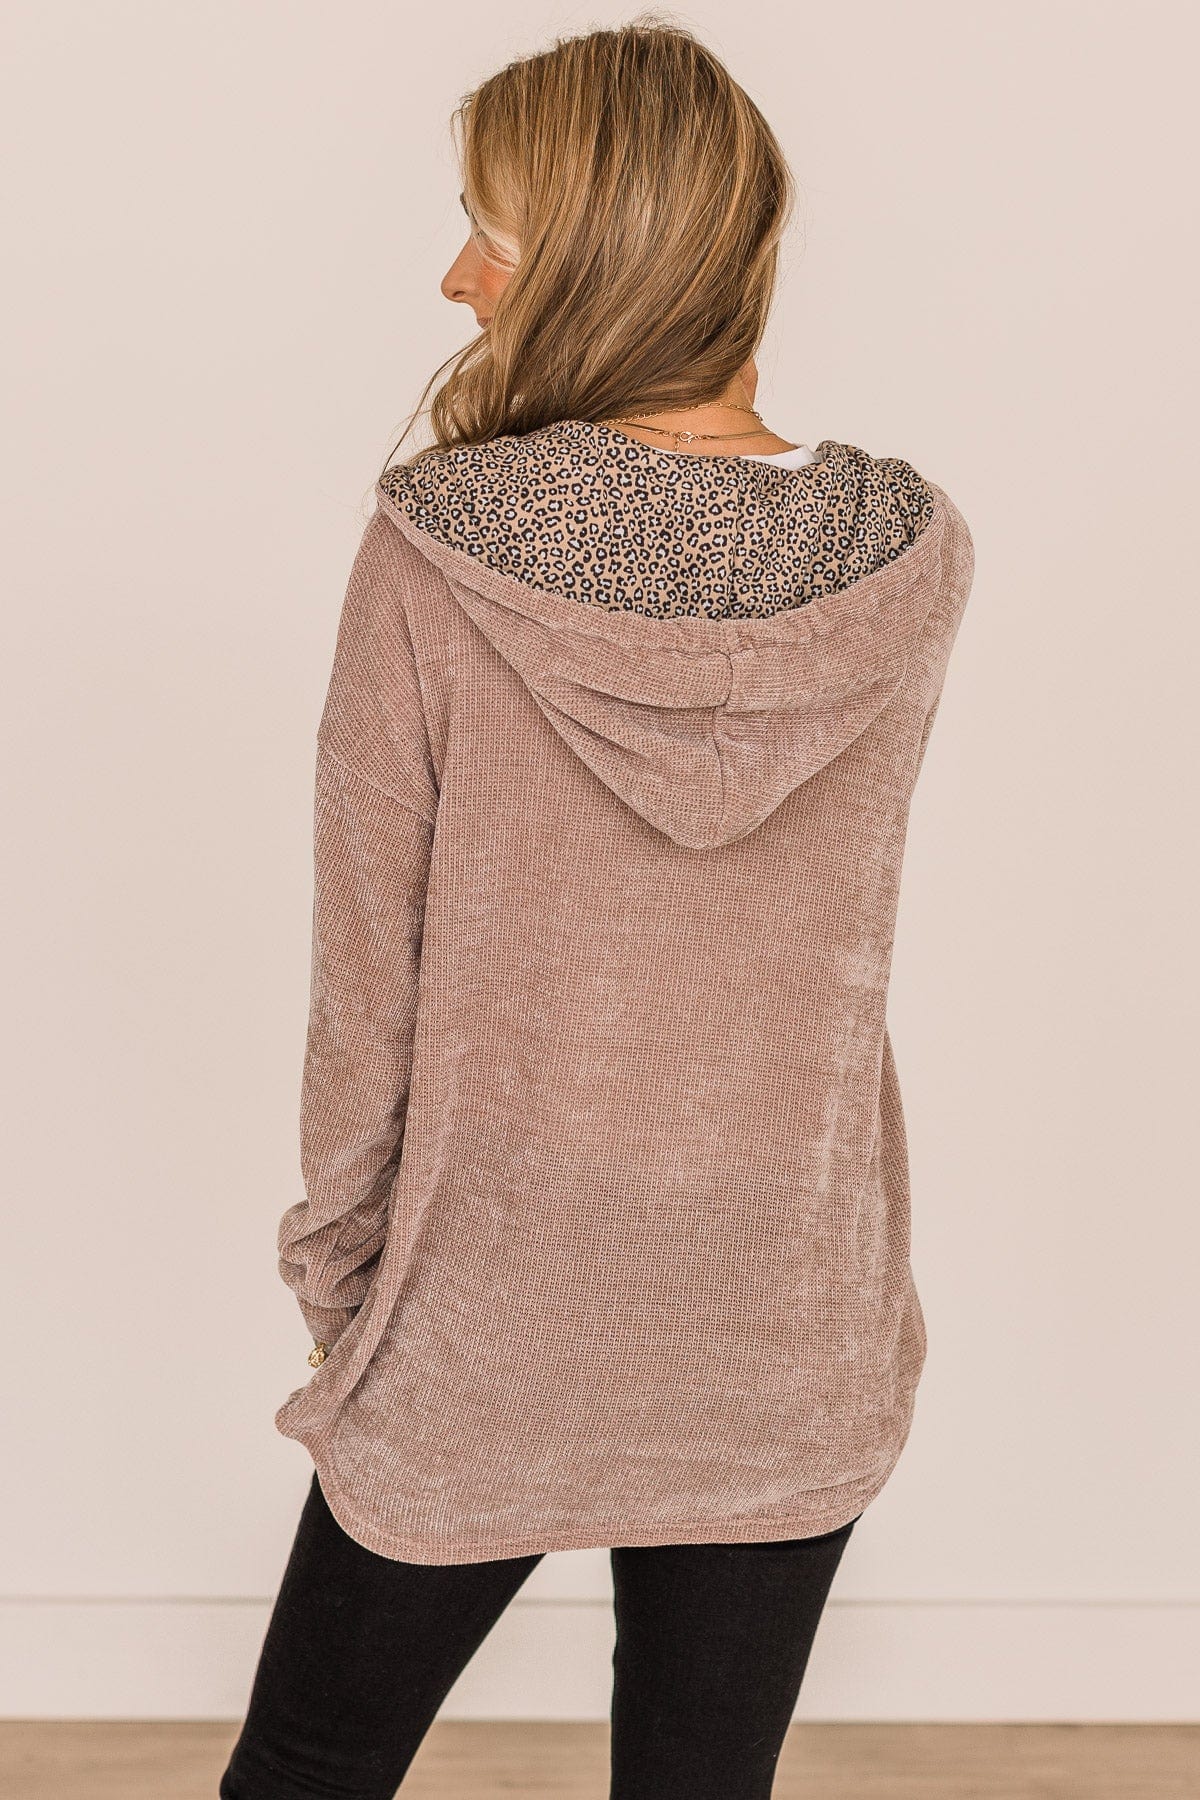 To Be Honest Button Down Knit Hoodie- Light Mocha